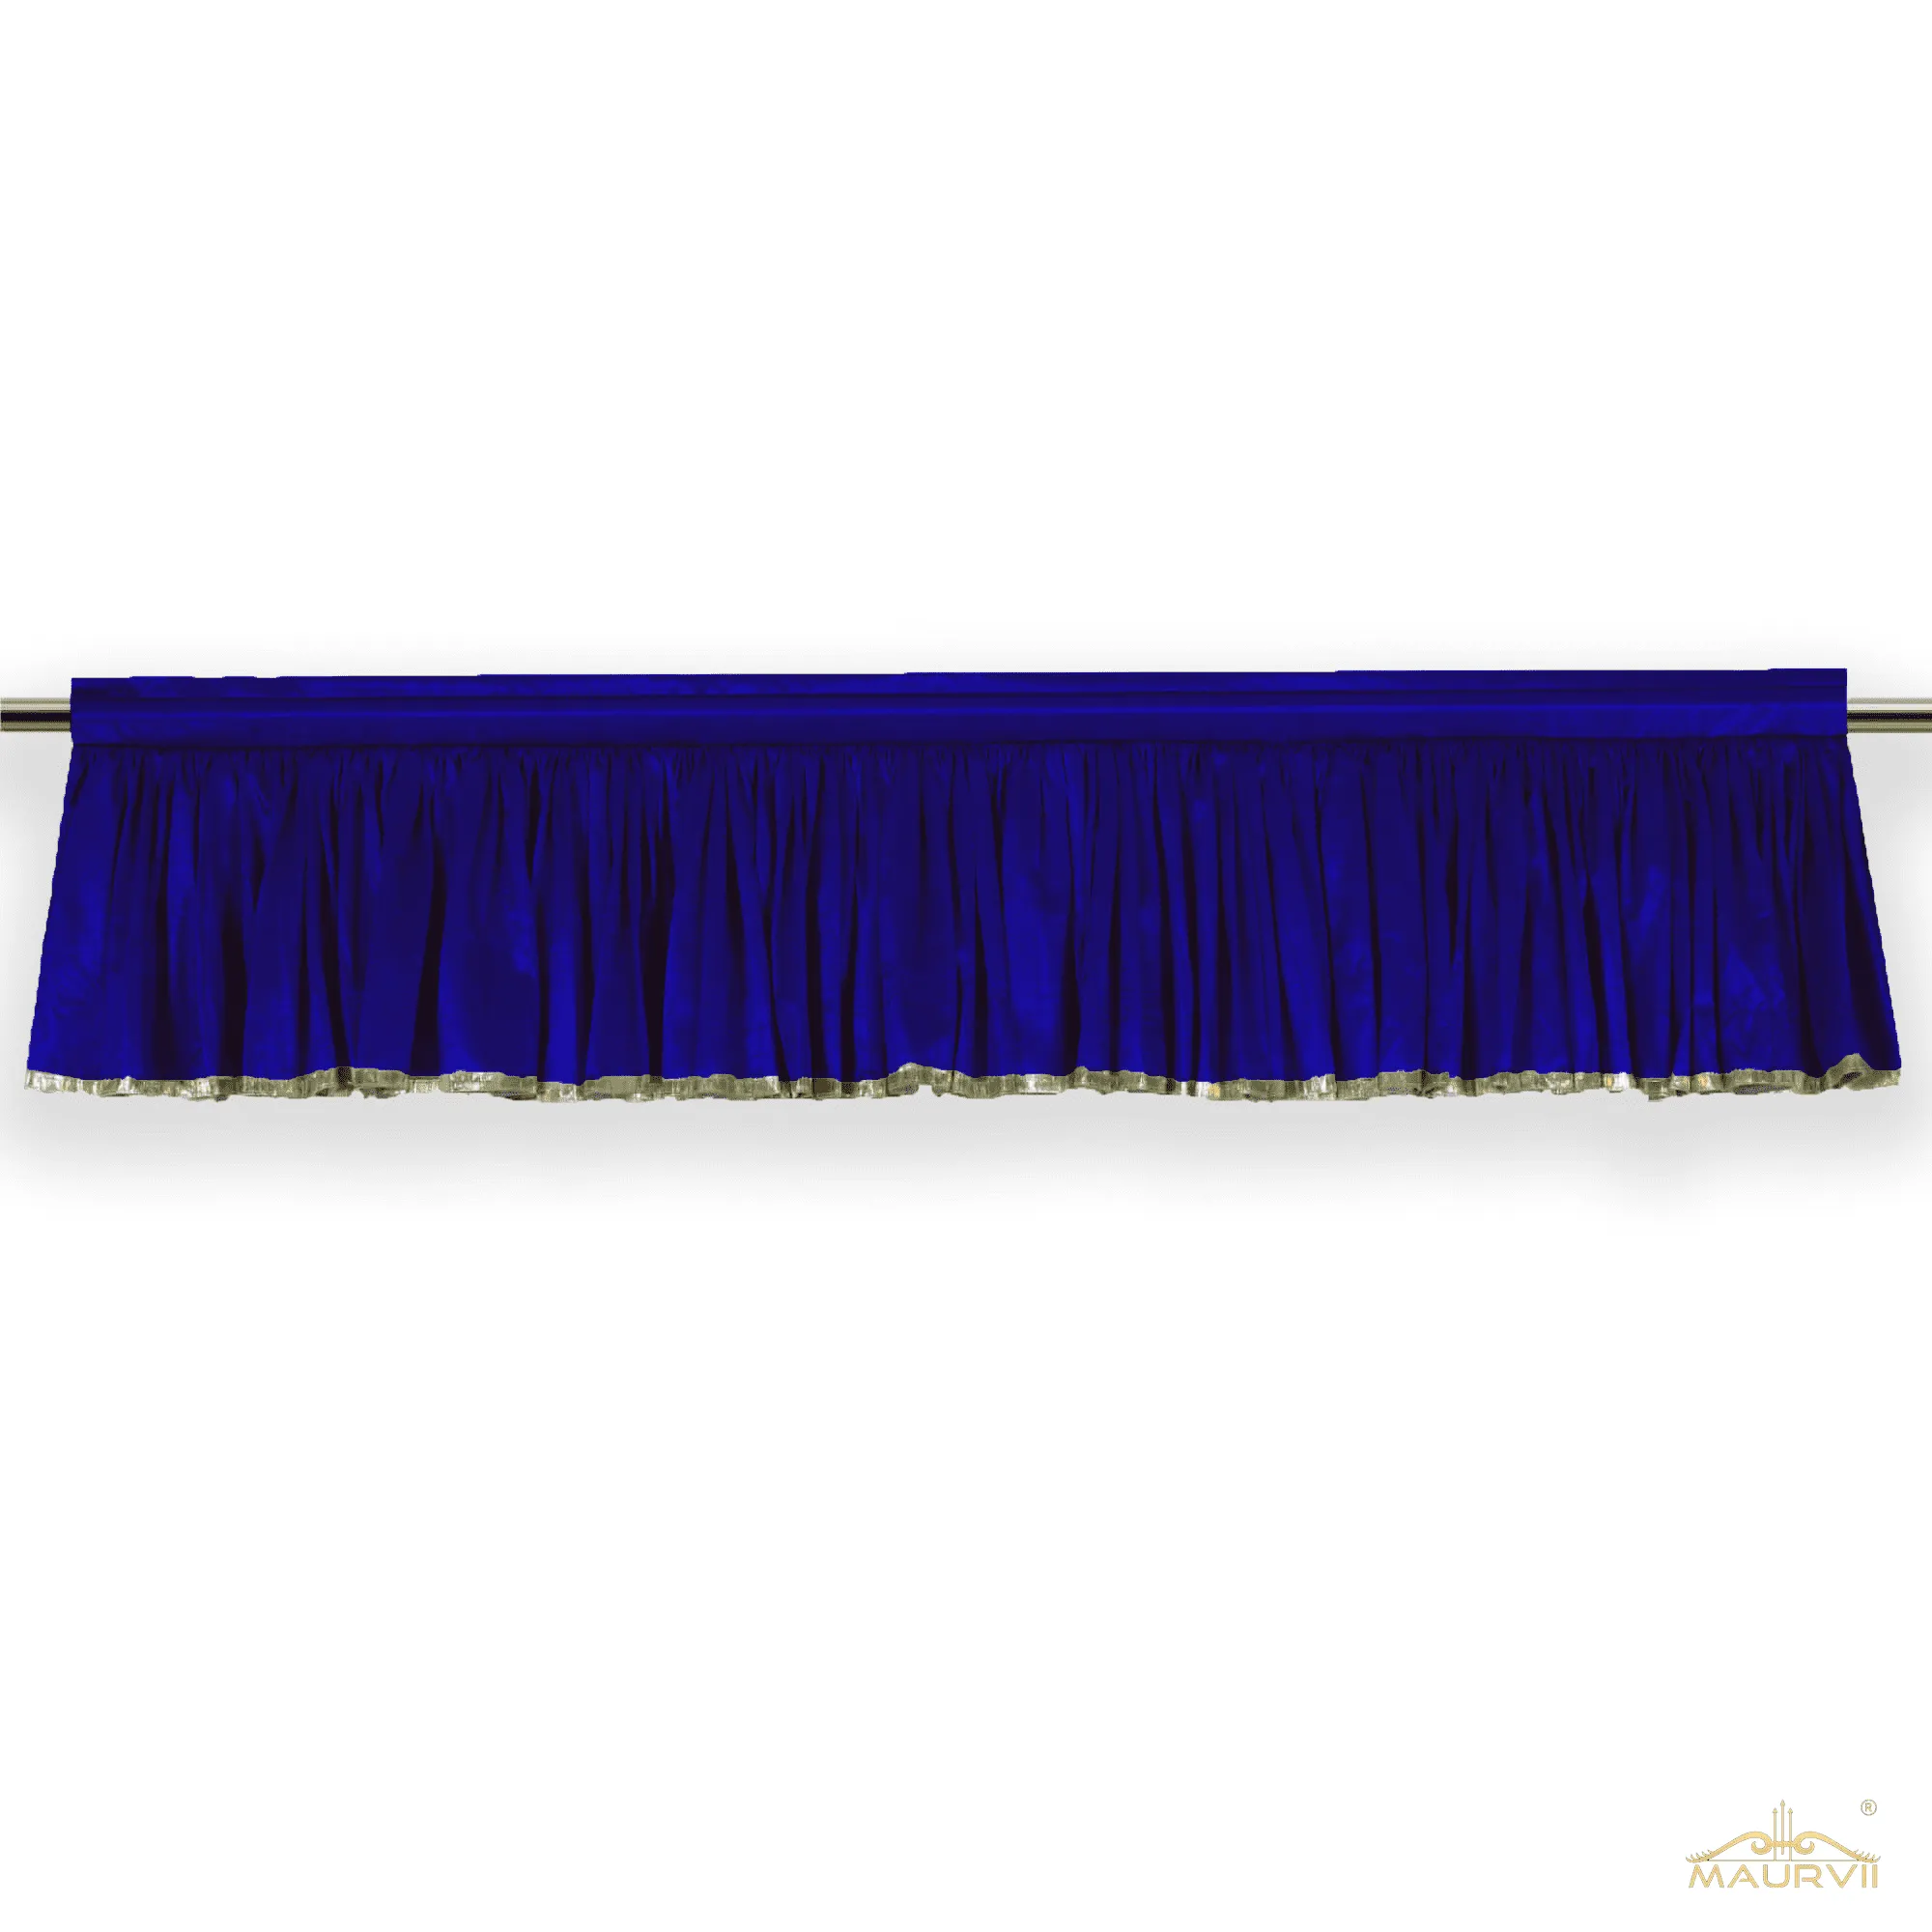 Blue Pleated Valance installed with curtain rod